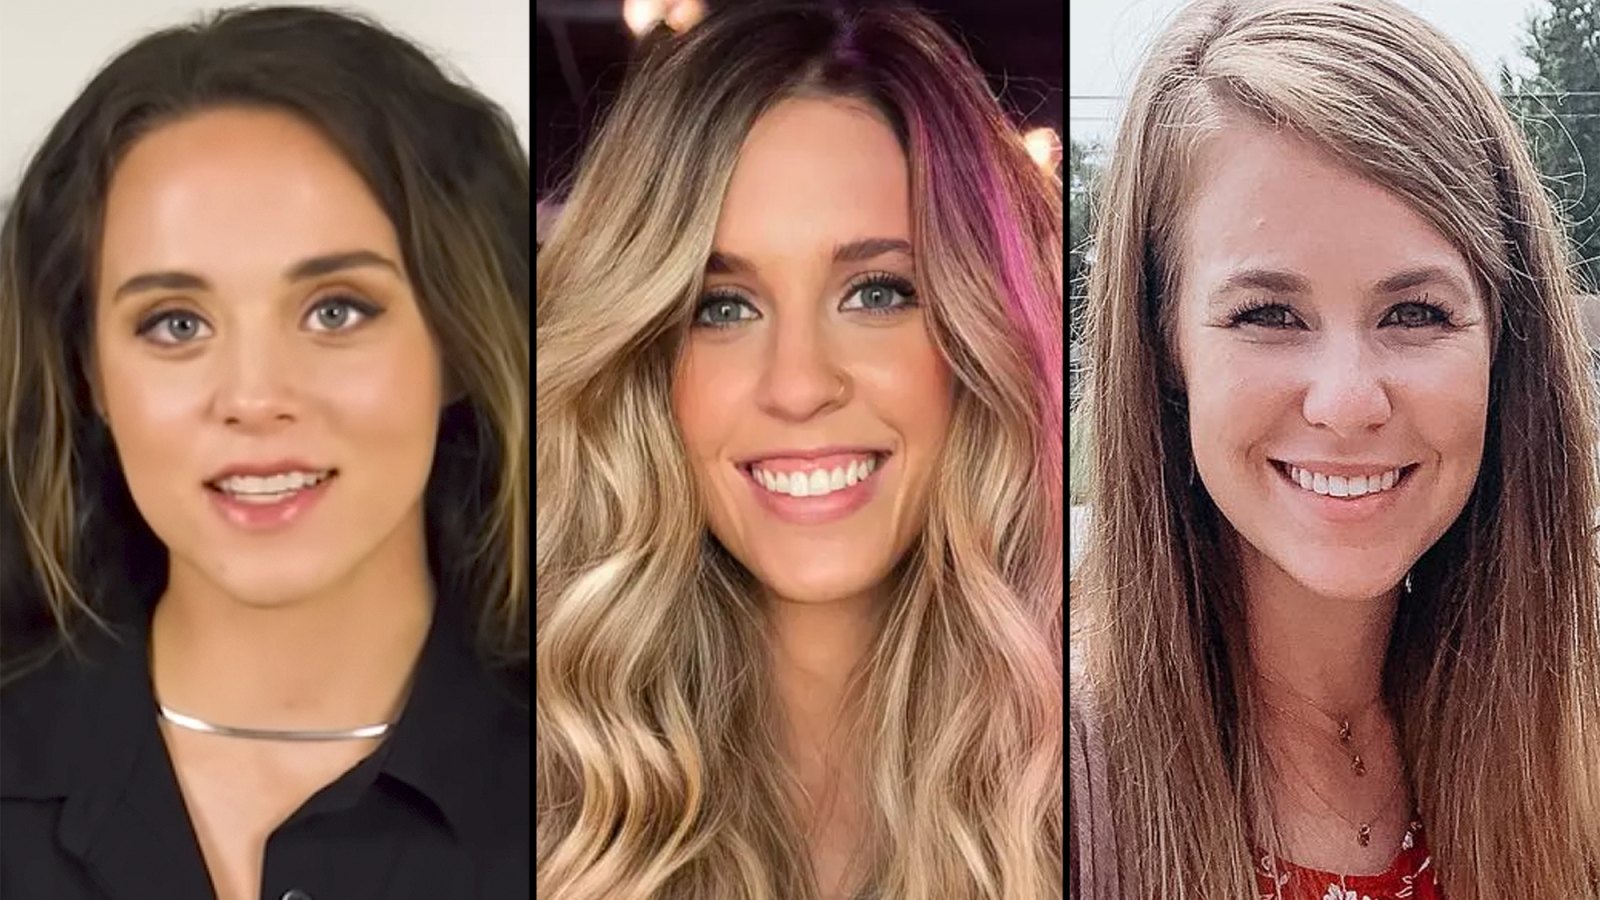 Jinger Duggar Hangs Out With Jill and Jana After Docuseries Drama